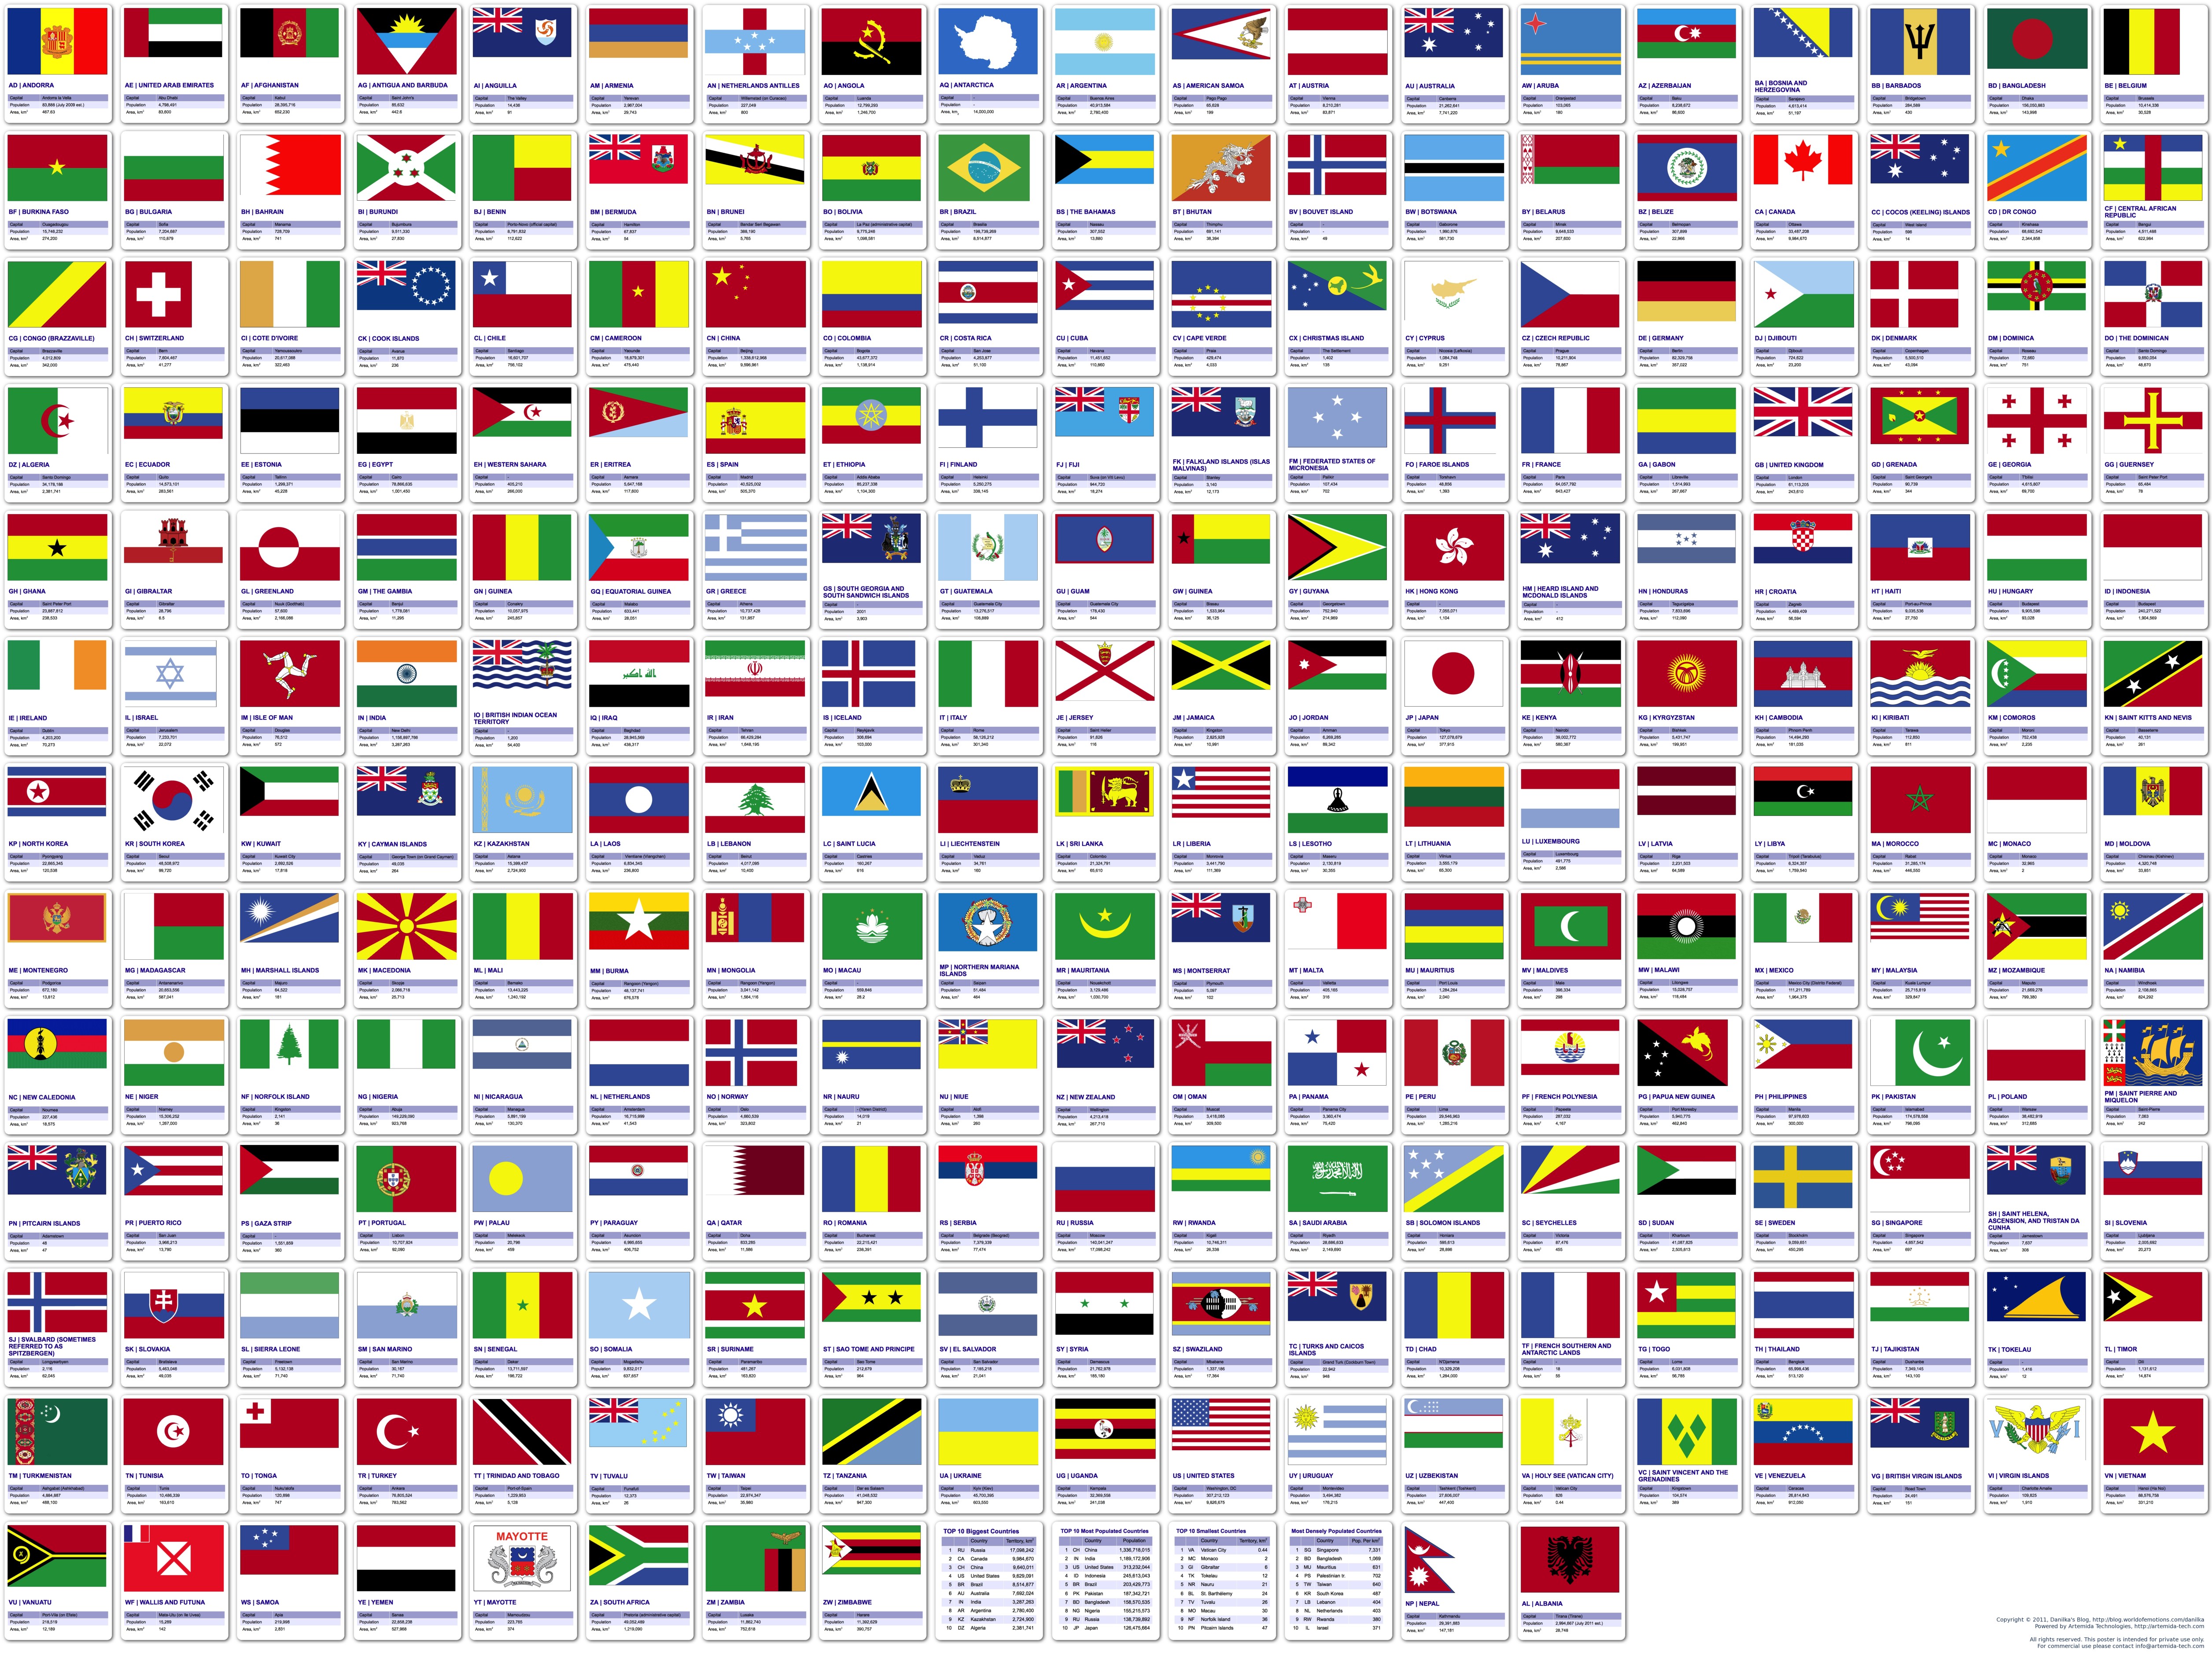 All_Flags_of_the_World_5024x3757.jpg?9d7bd4